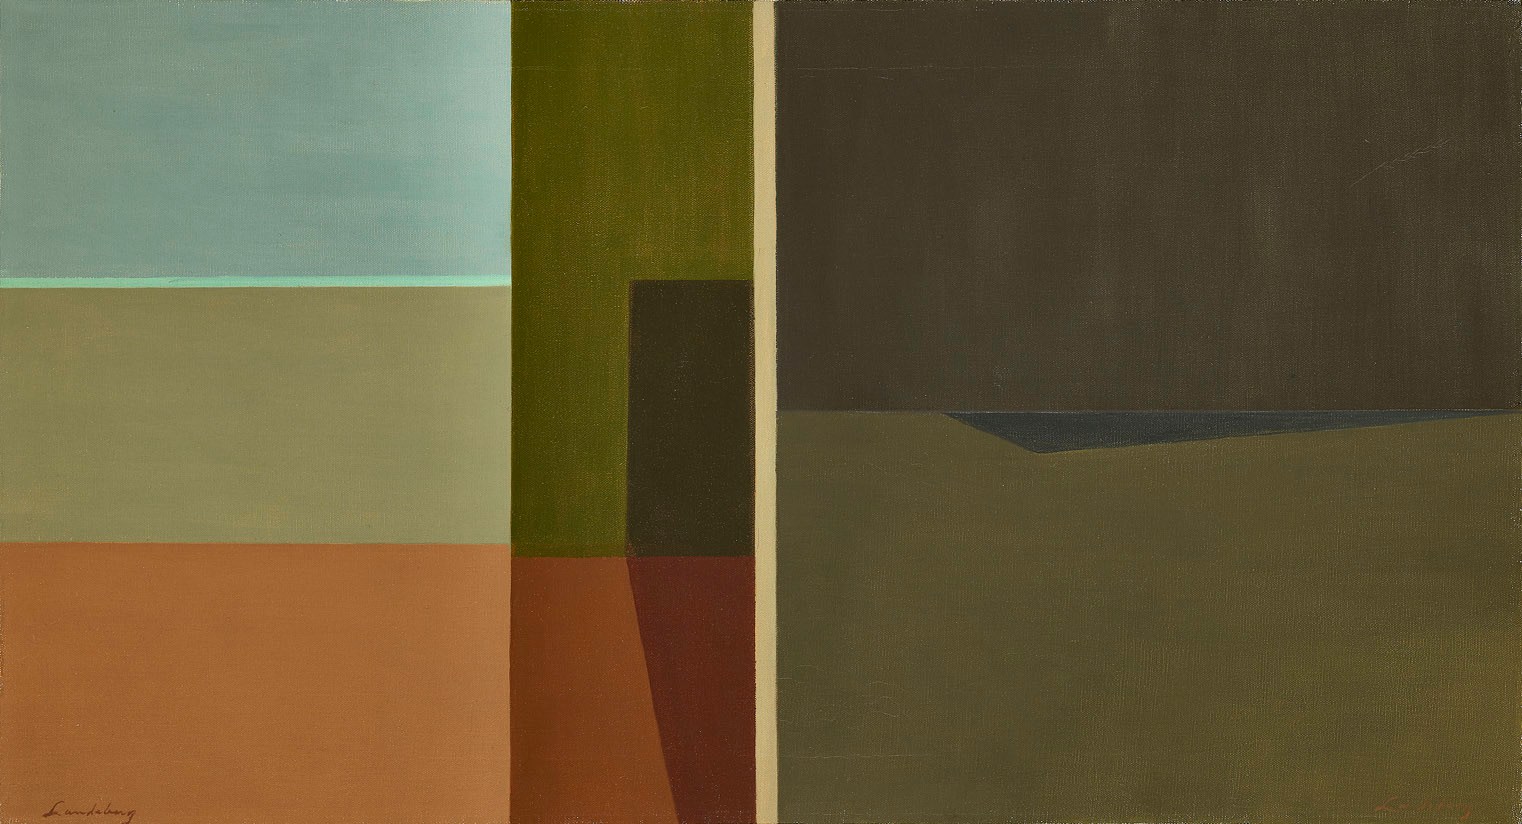 Ambiguity, 1959

oil on canvas

20 x 36 inches; 50.8 x 91.4 centimeters